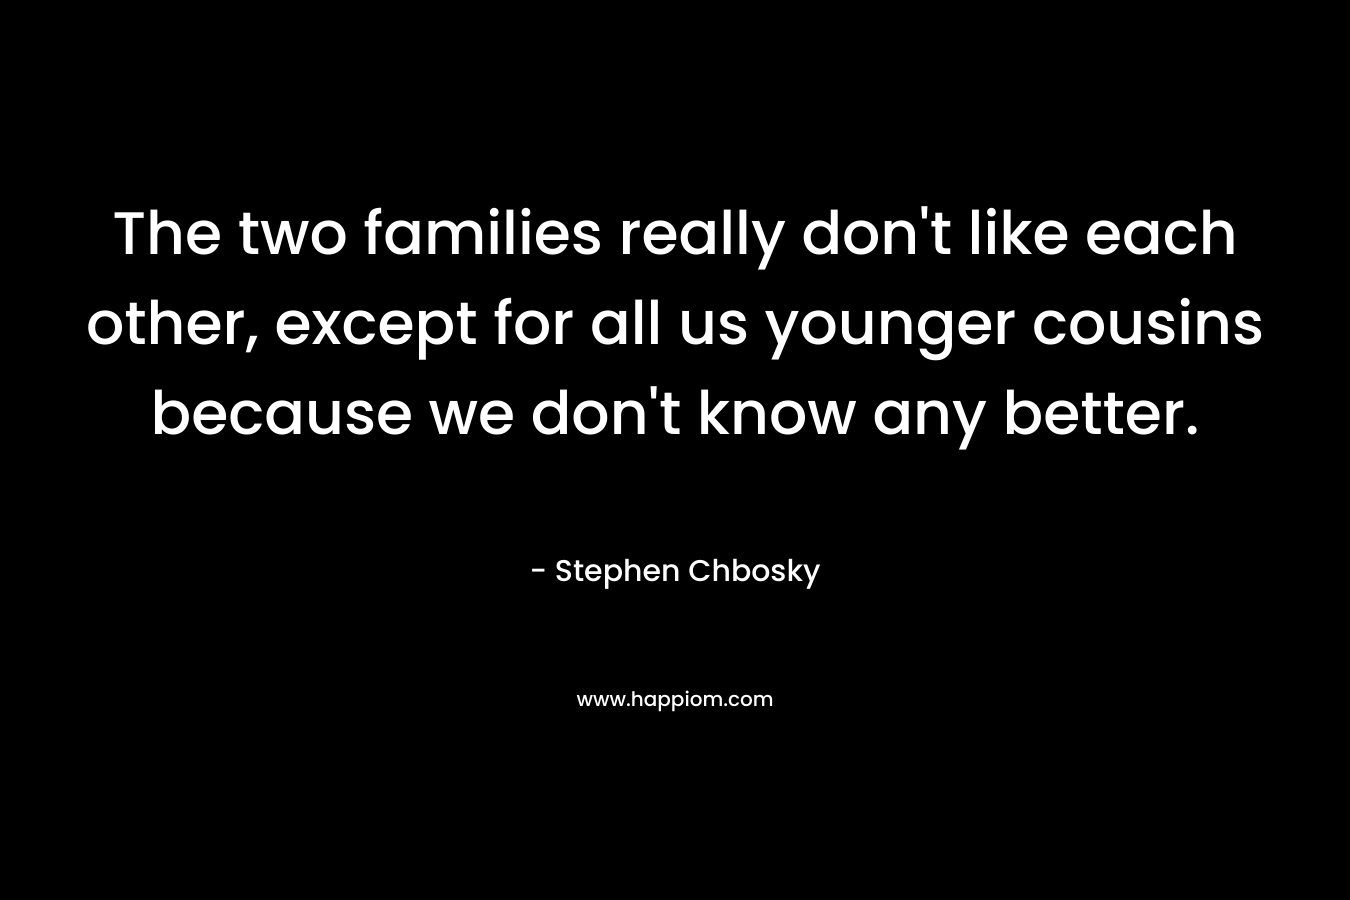 The two families really don’t like each other, except for all us younger cousins because we don’t know any better. – Stephen Chbosky